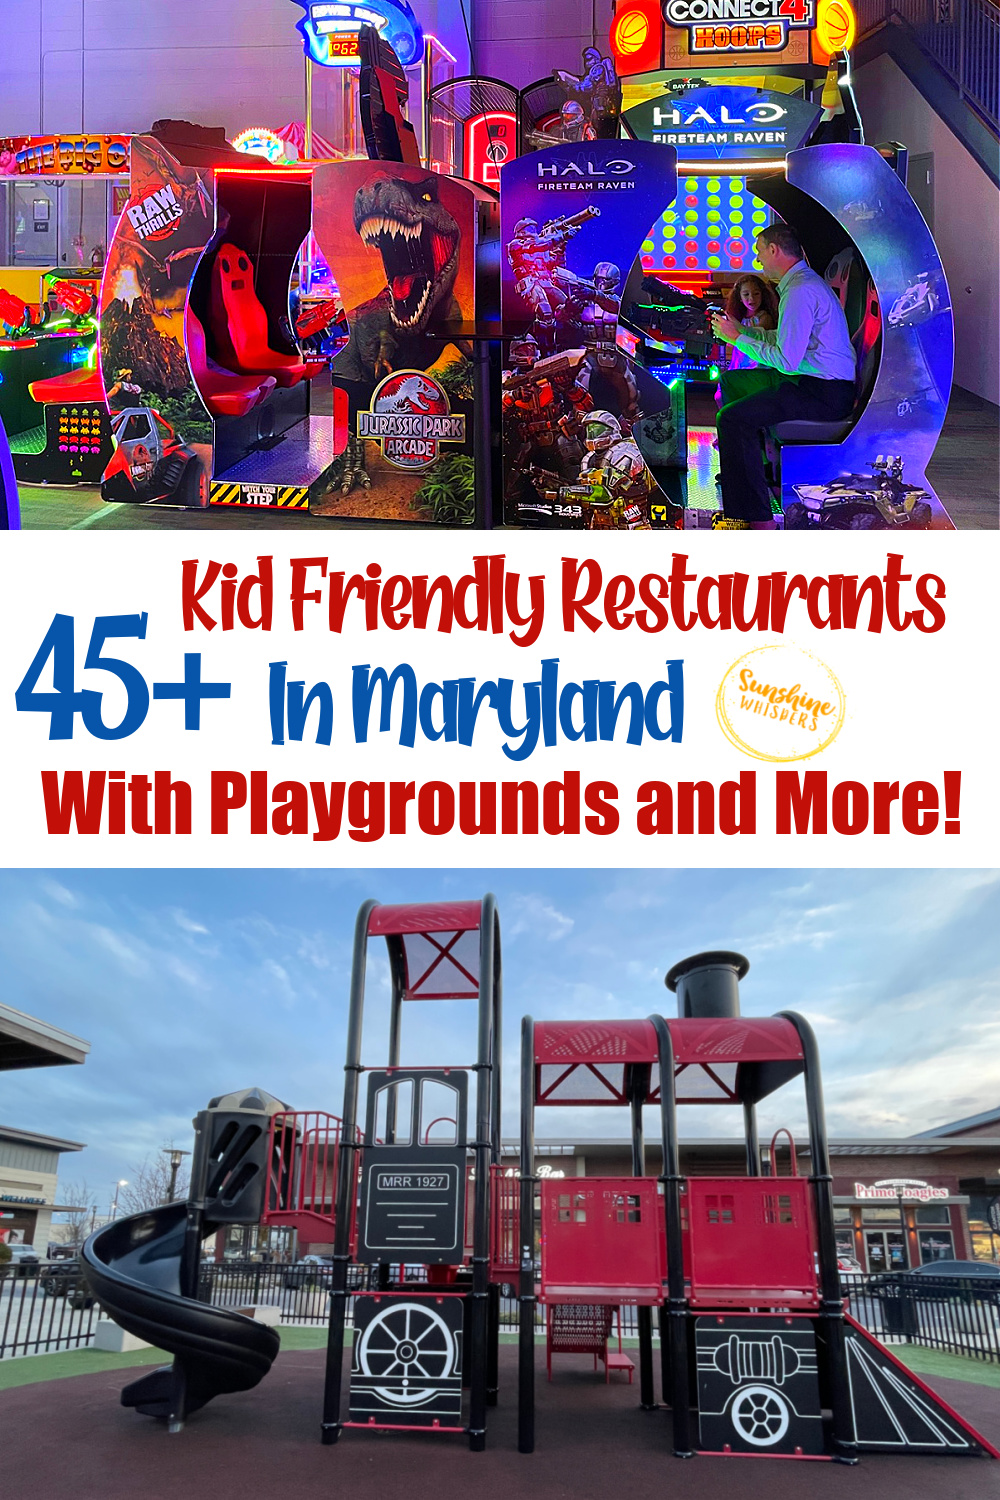 Kid friendly maryland restaurants with playgrounds and more